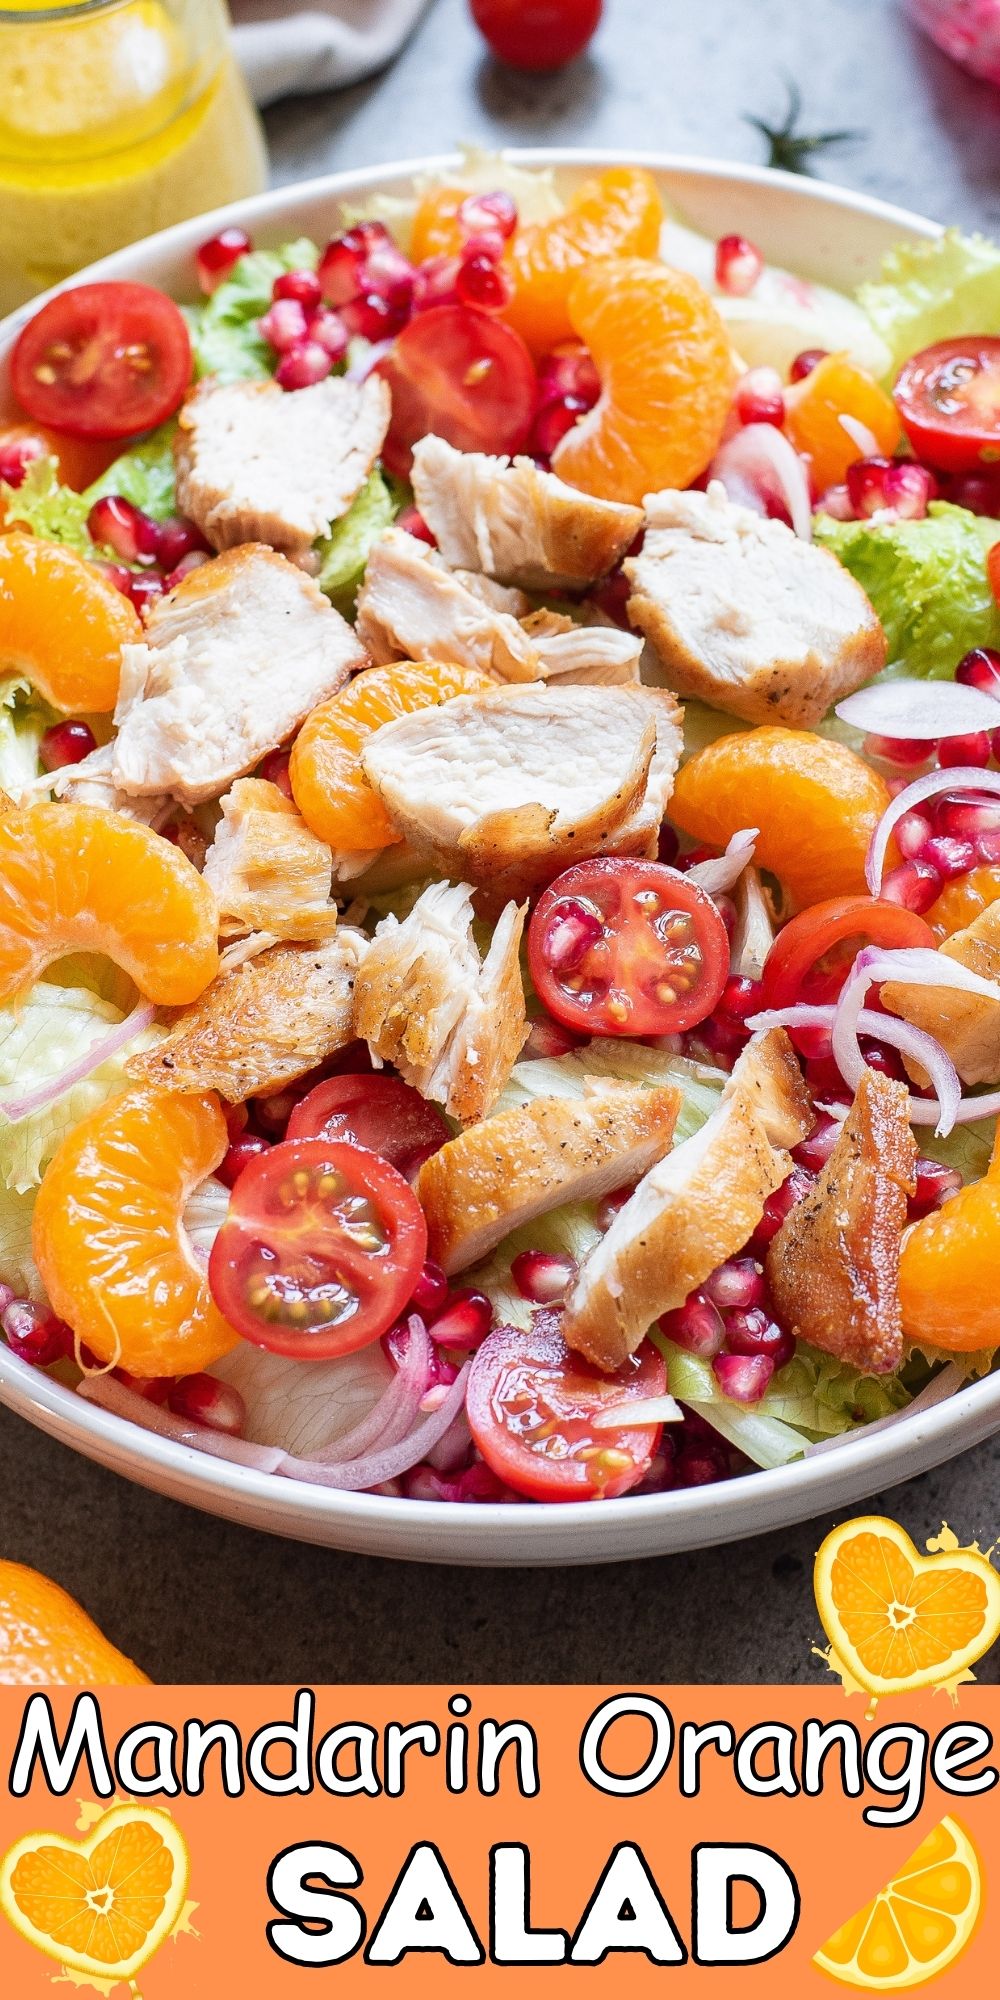 This Mandarin Orange Salad with Chicken is bursting with flavor! Mixed fruits with perfect seasonings, make this a family favorite!